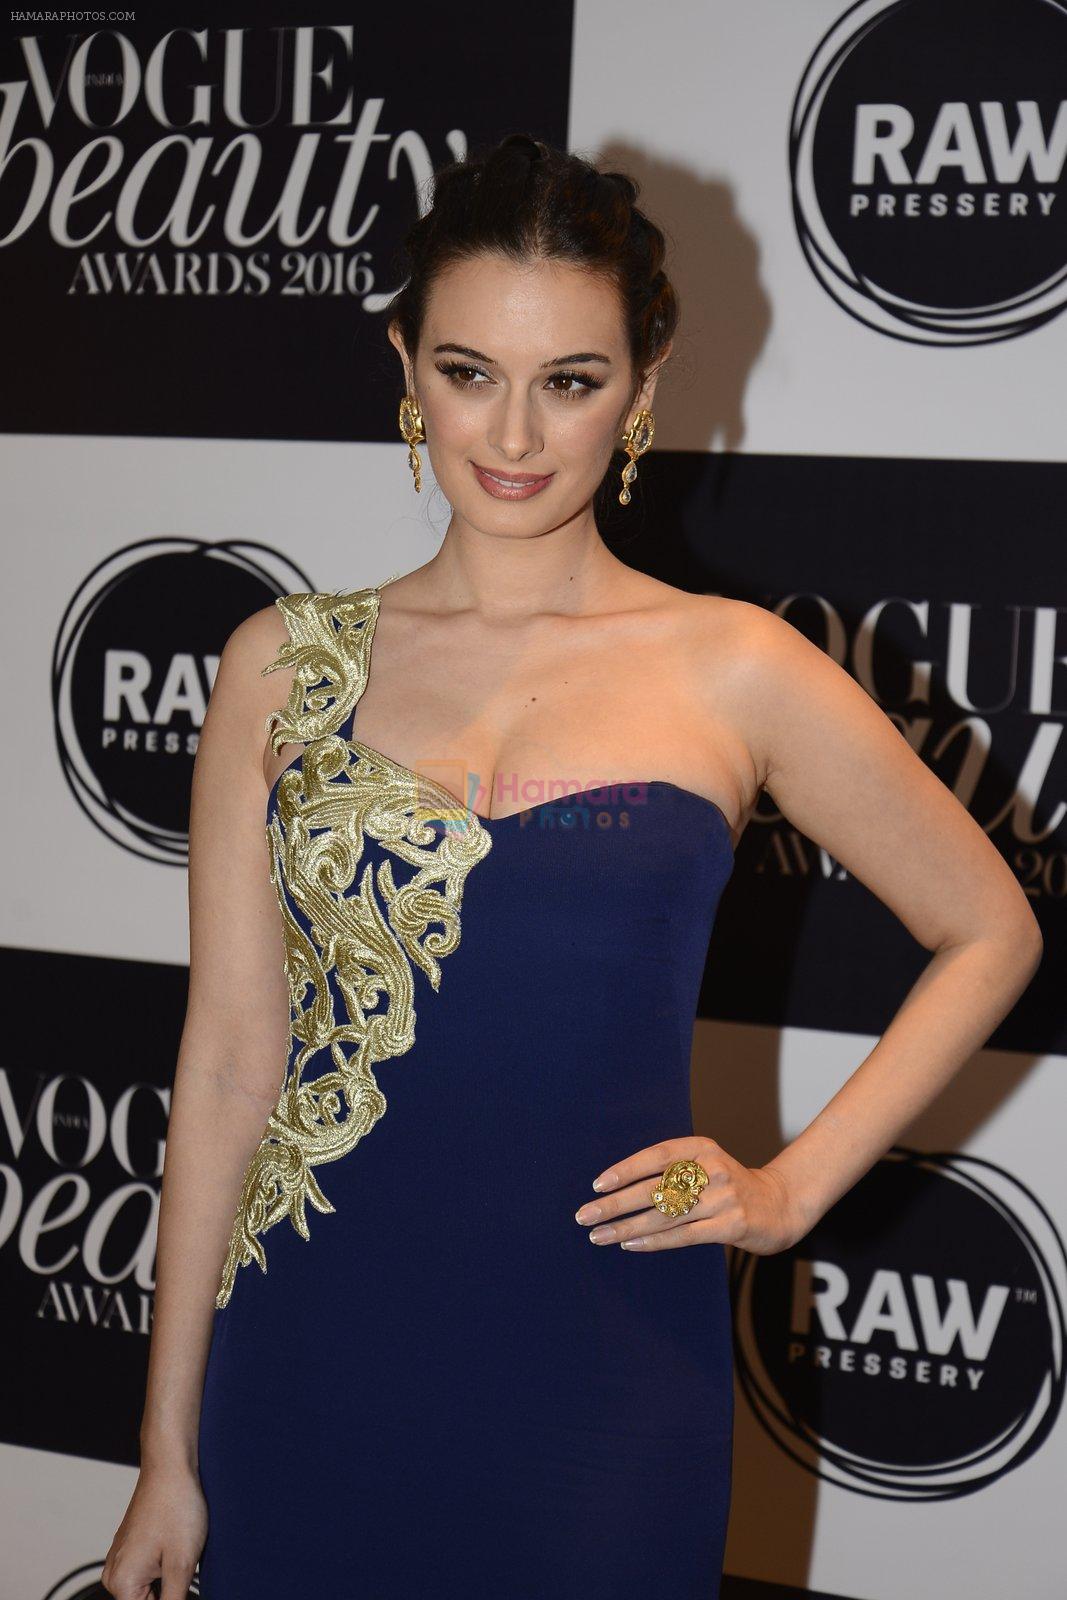 Evelyn Sharma at Vogue Beauty Awards 2016 on 27th July 2016